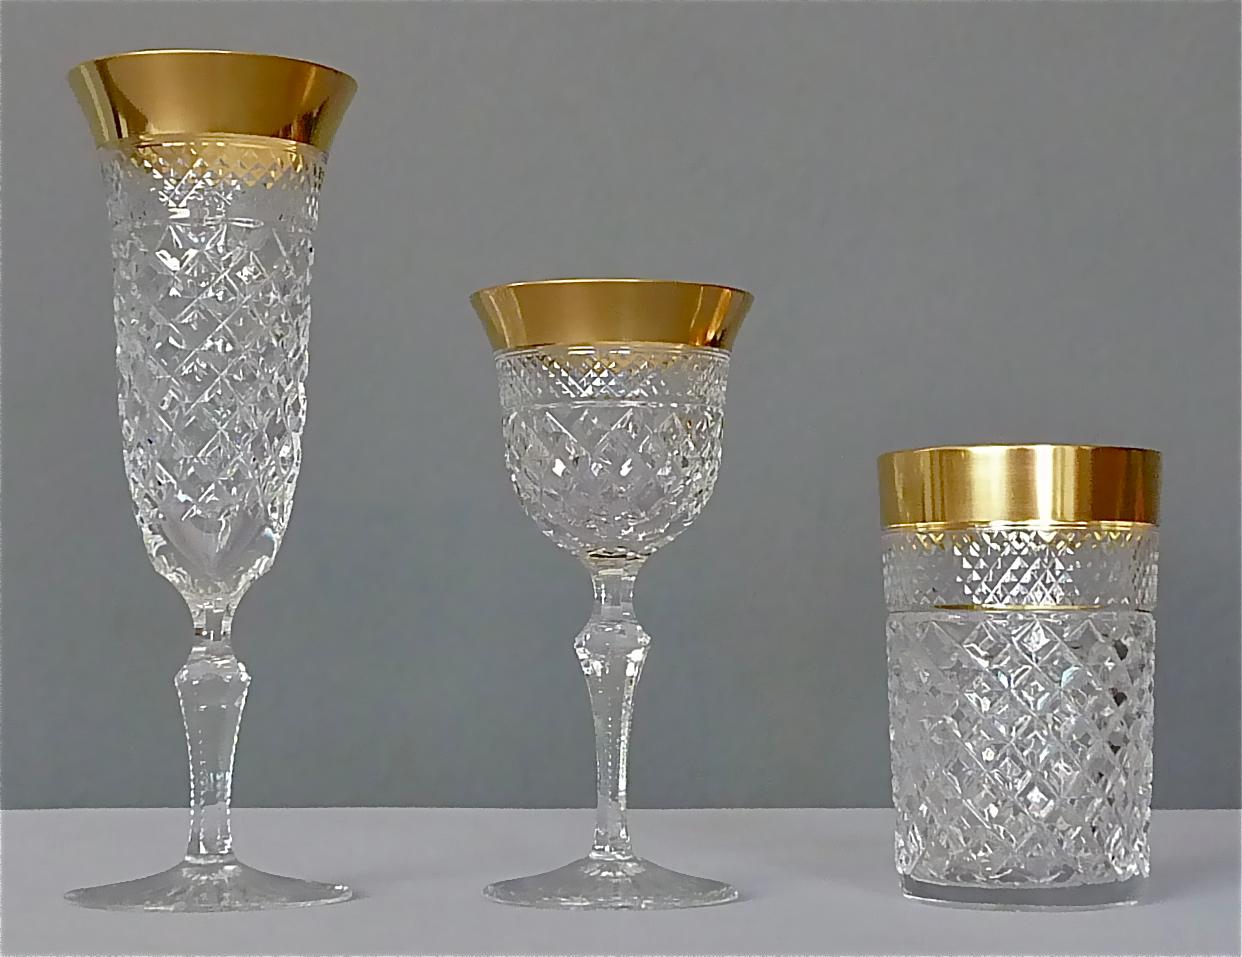 Gorgeous 20th century handcrafted faceted crystal glass set with 24 carat gold rim made by Josephinenhütte Moser around 1960-70 and very is the style of the exclusive french company Baccarat or Saint Louis thistle. This set of 24 pieces comprises